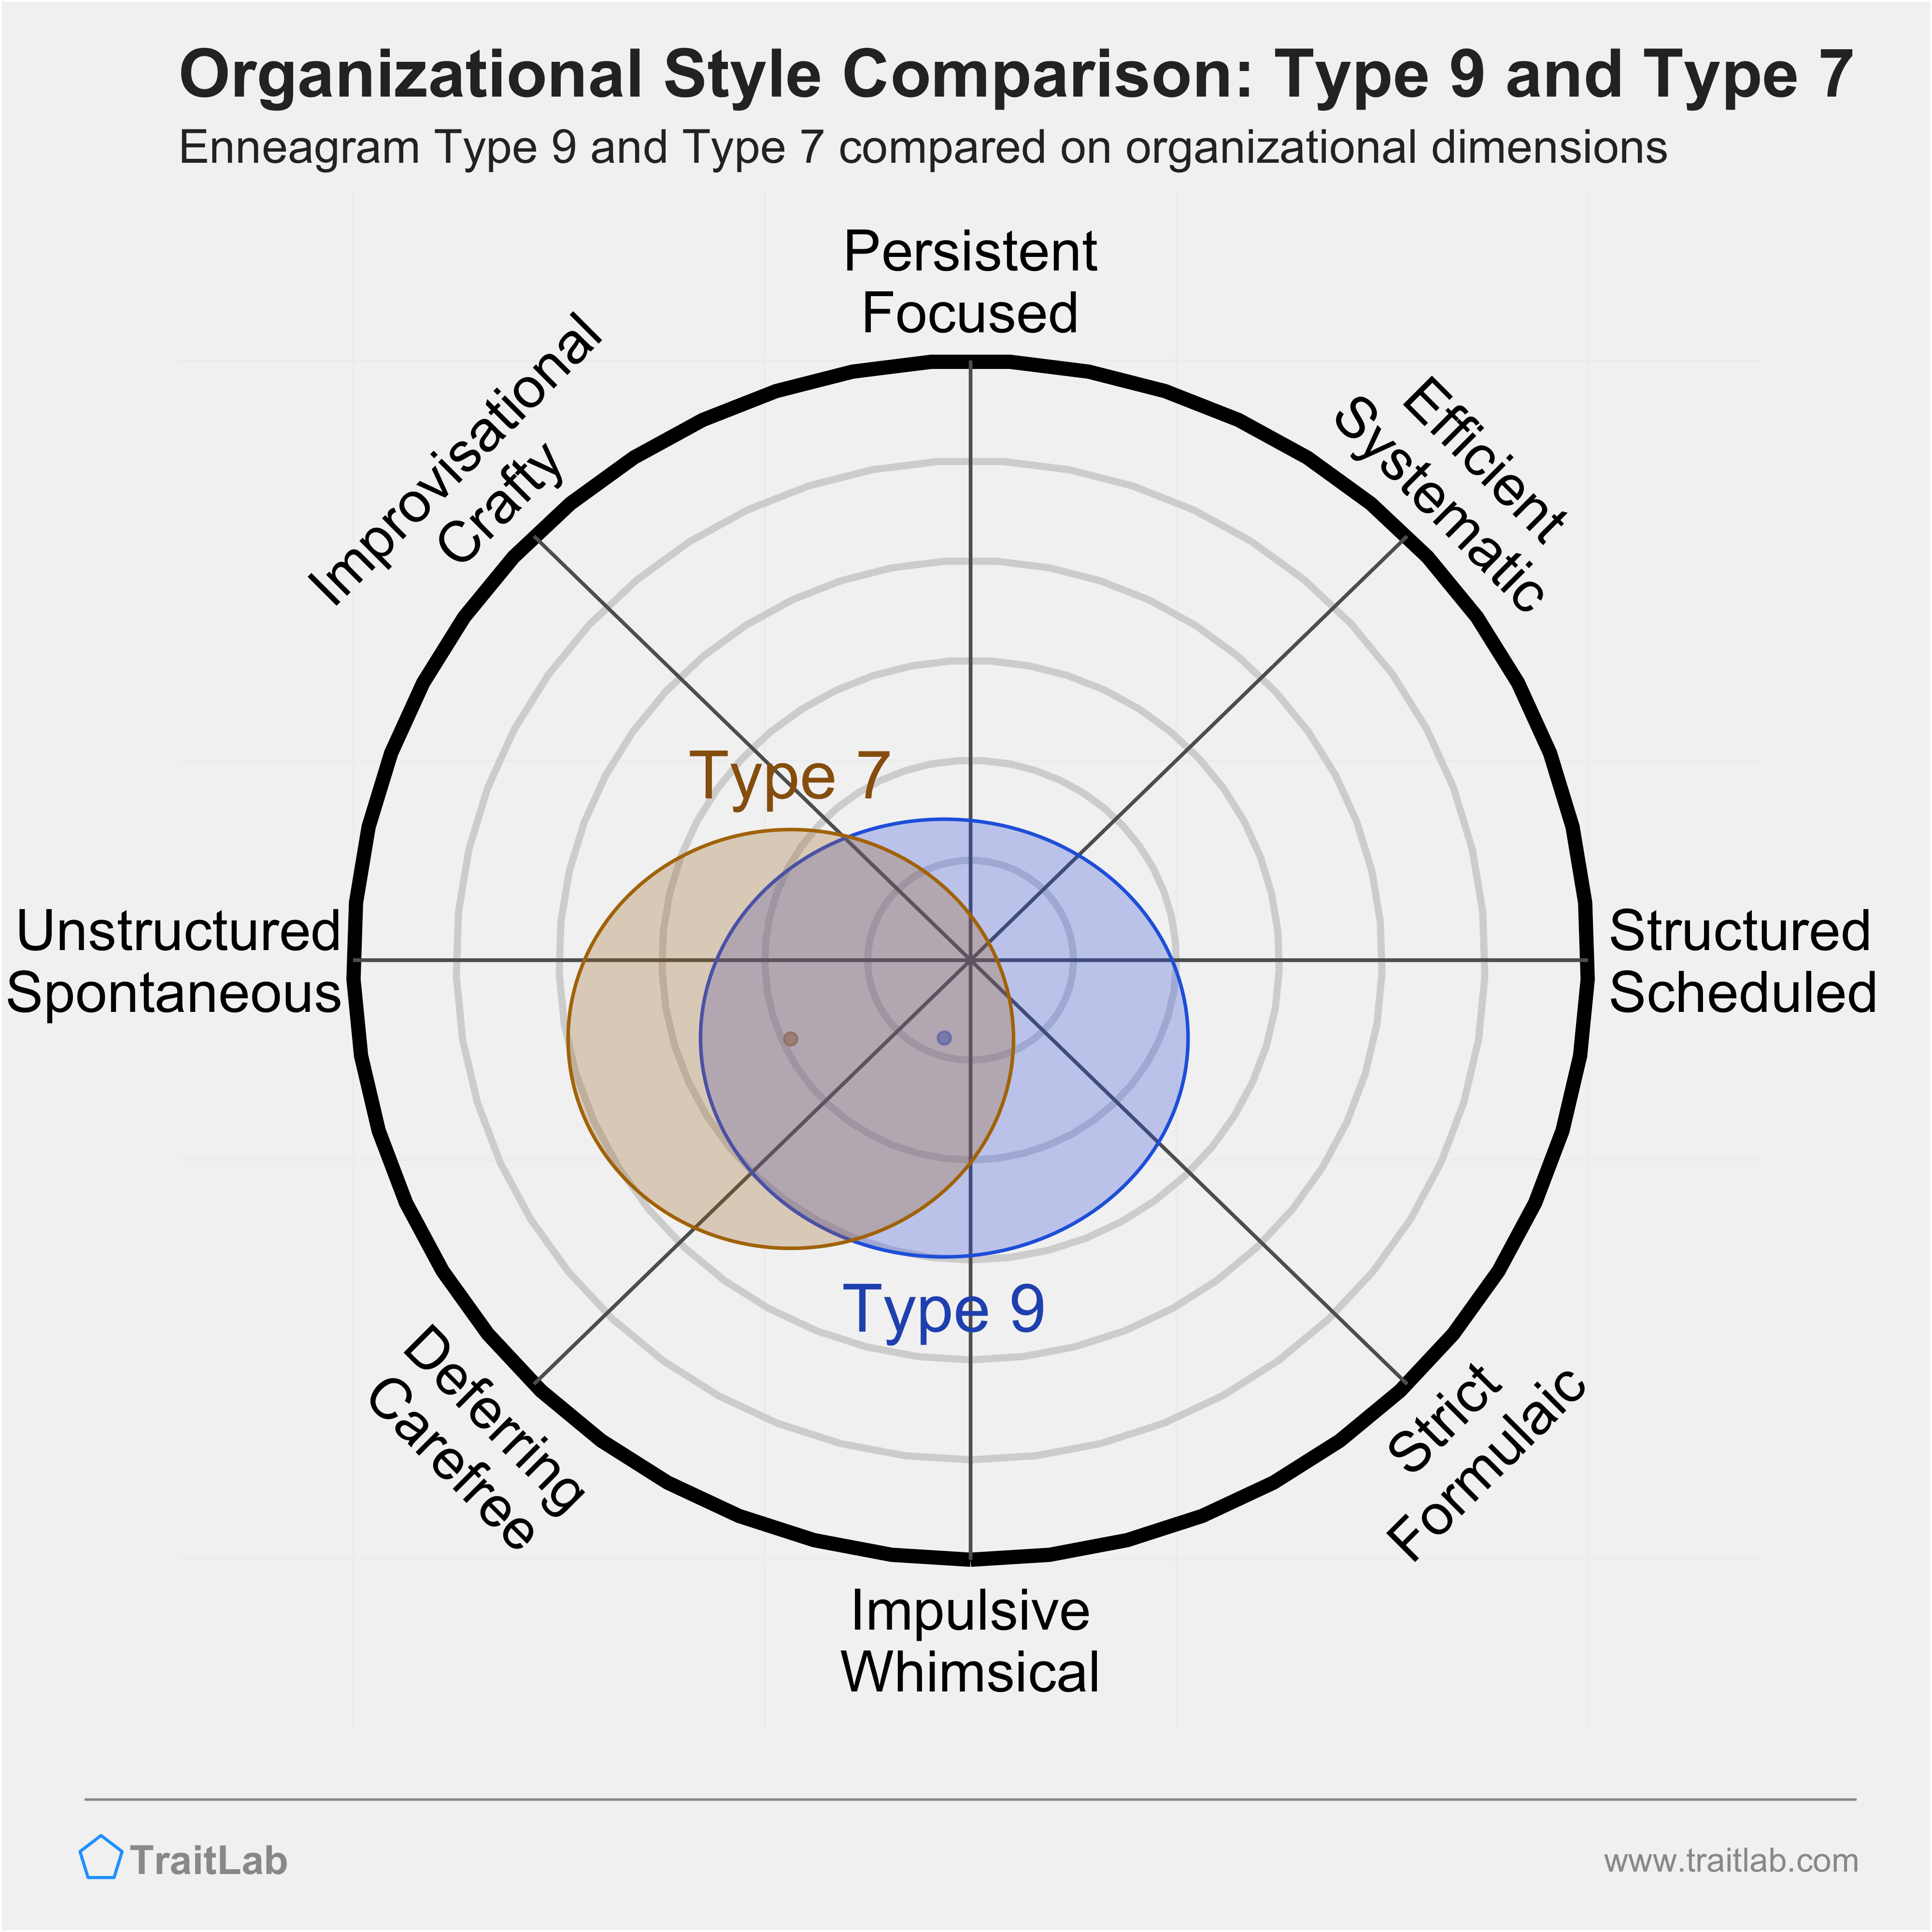 Type 9 and Type 7 comparison across organizational dimensions